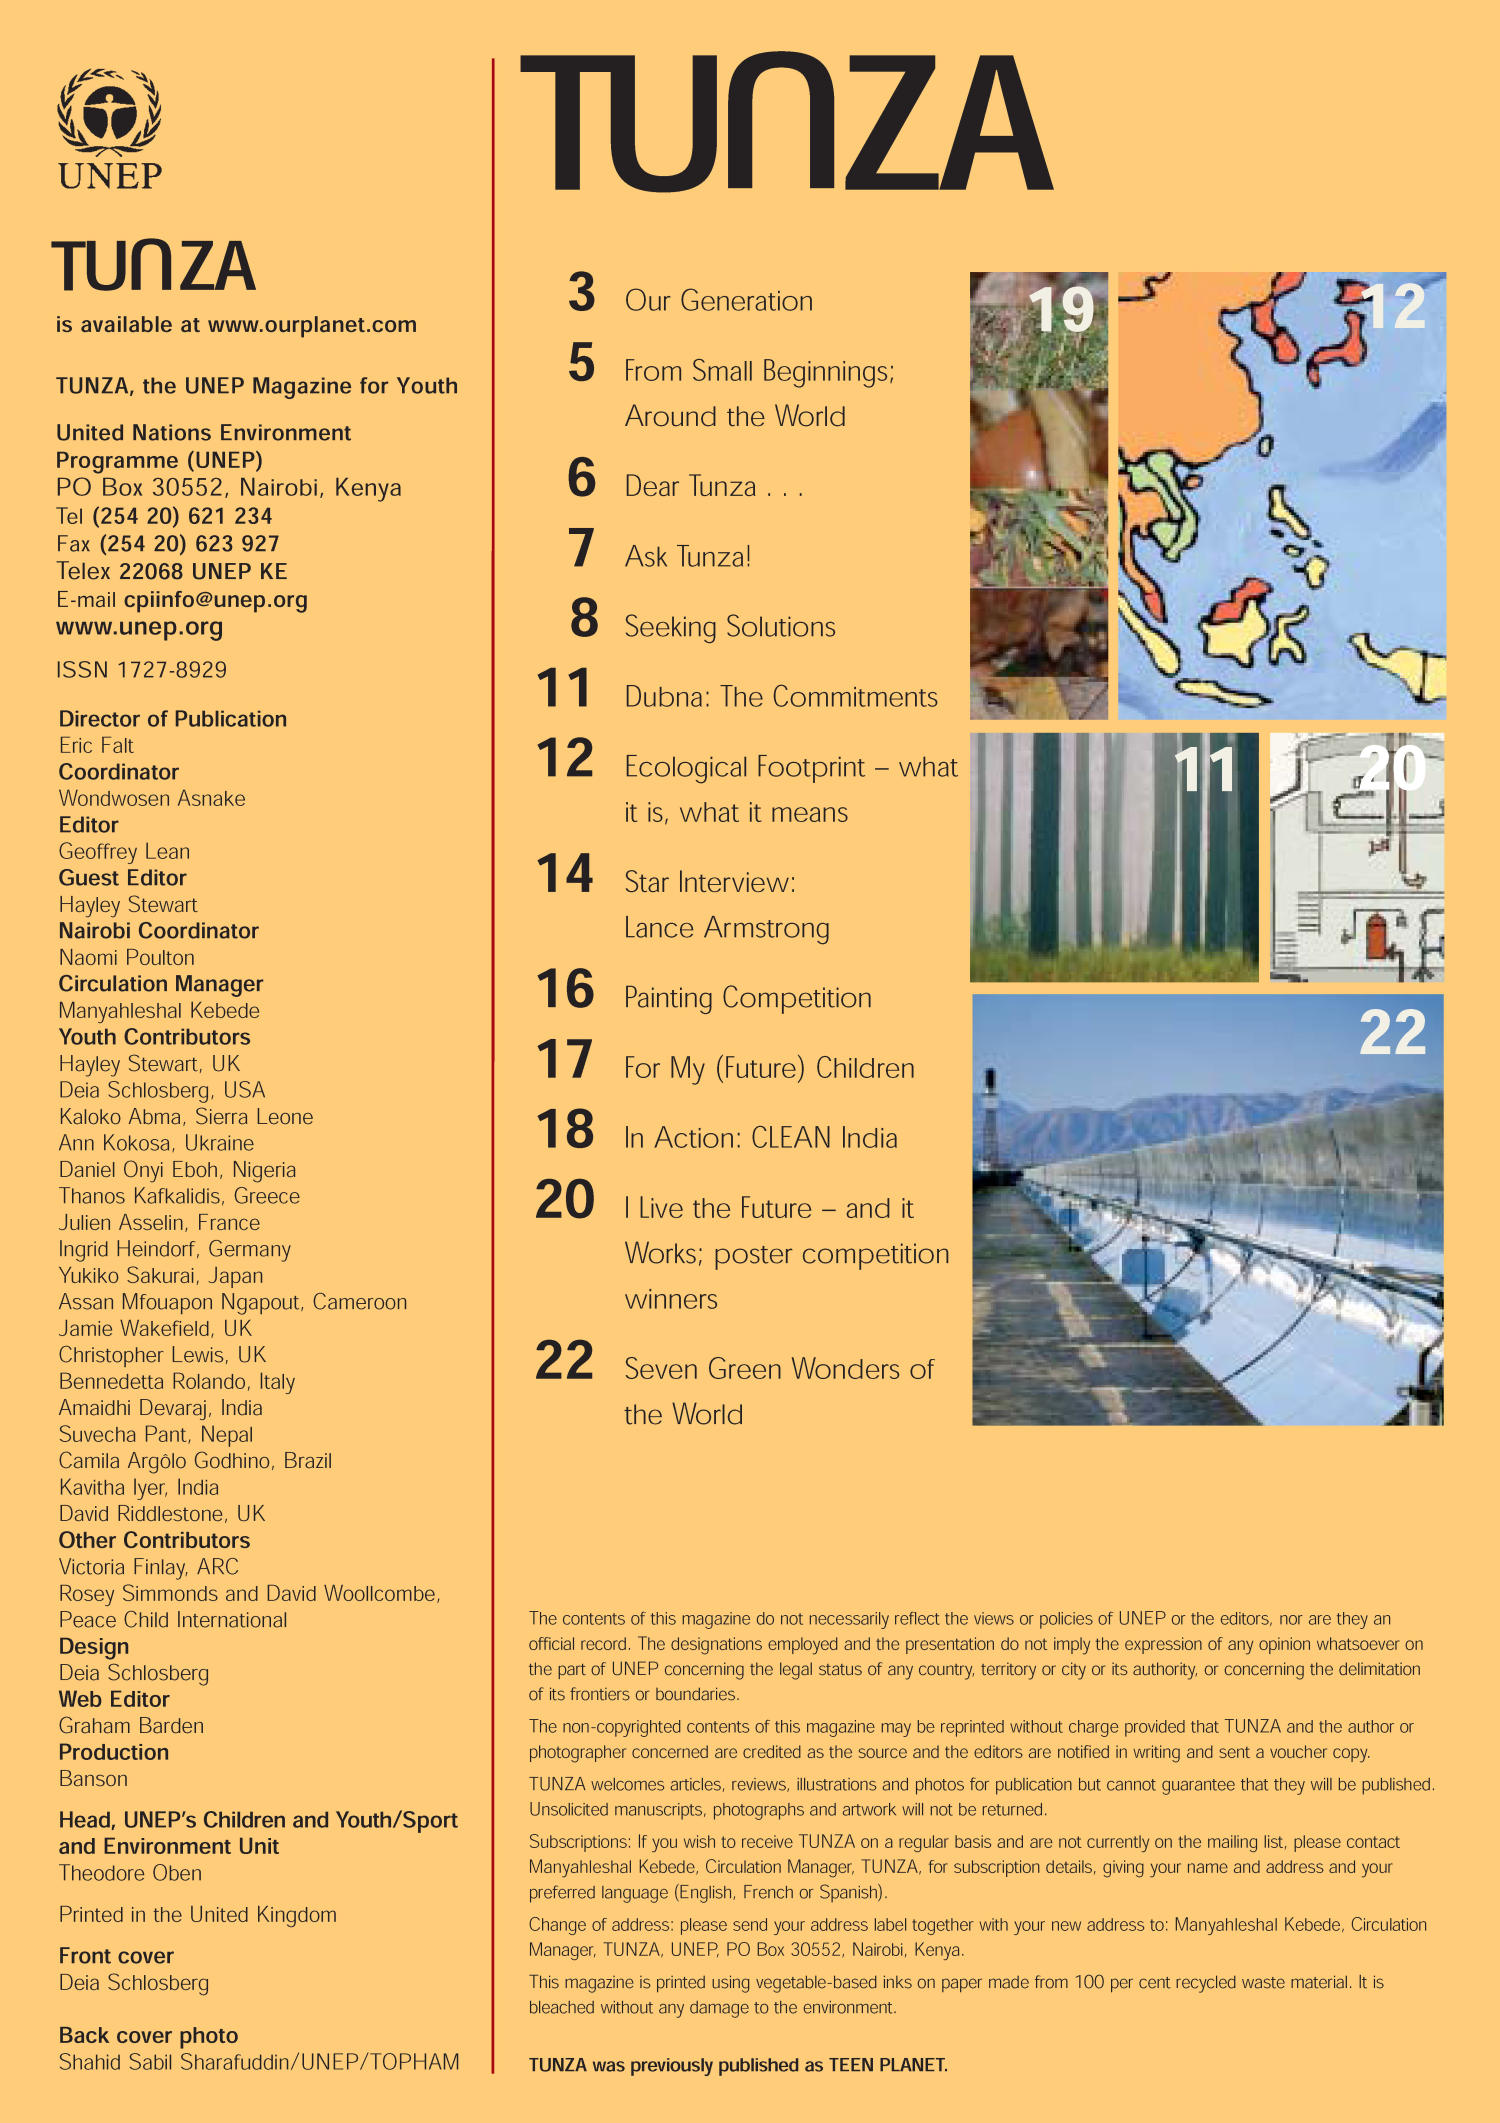 Tunza: The UNEP Magazine for Youth, Volume 1, Number 2, 2003
                                                
                                                    toc
                                                